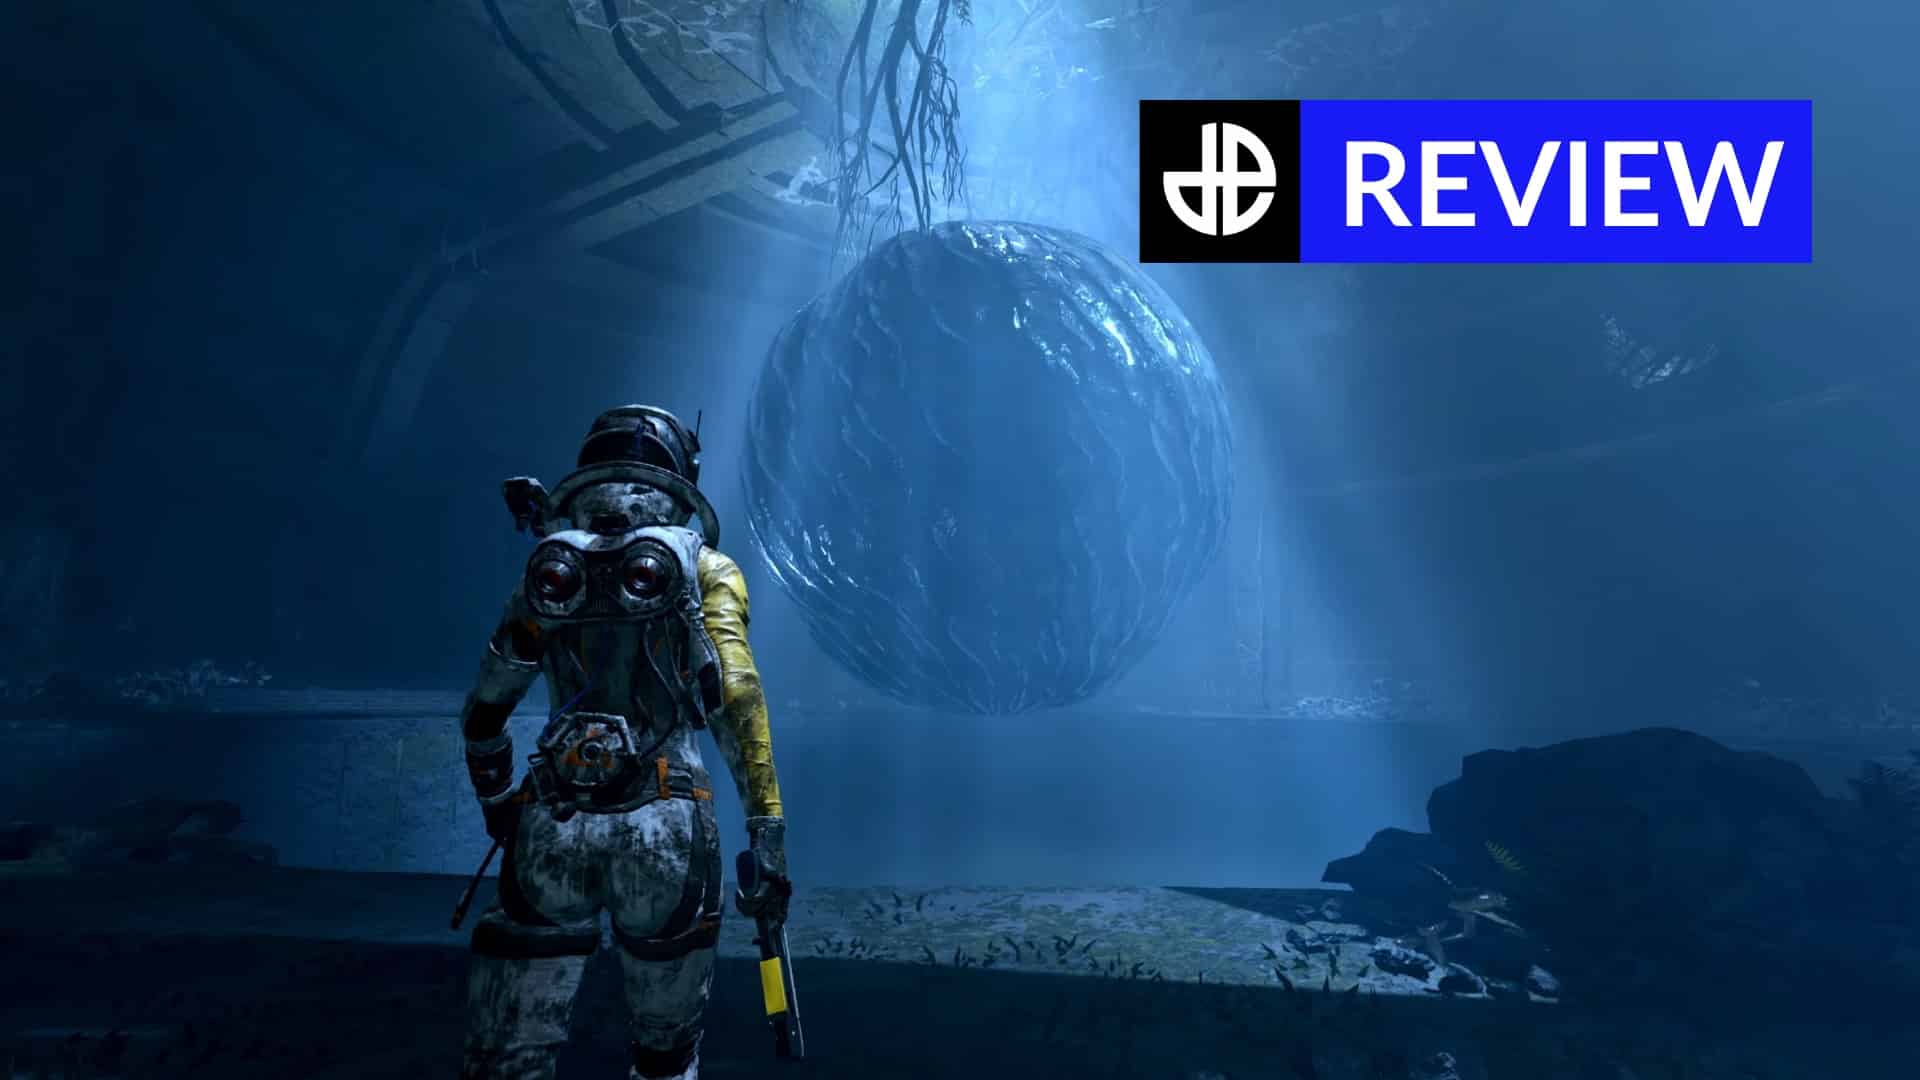 Returnal for PS5 is a magnificent DualSense showcase